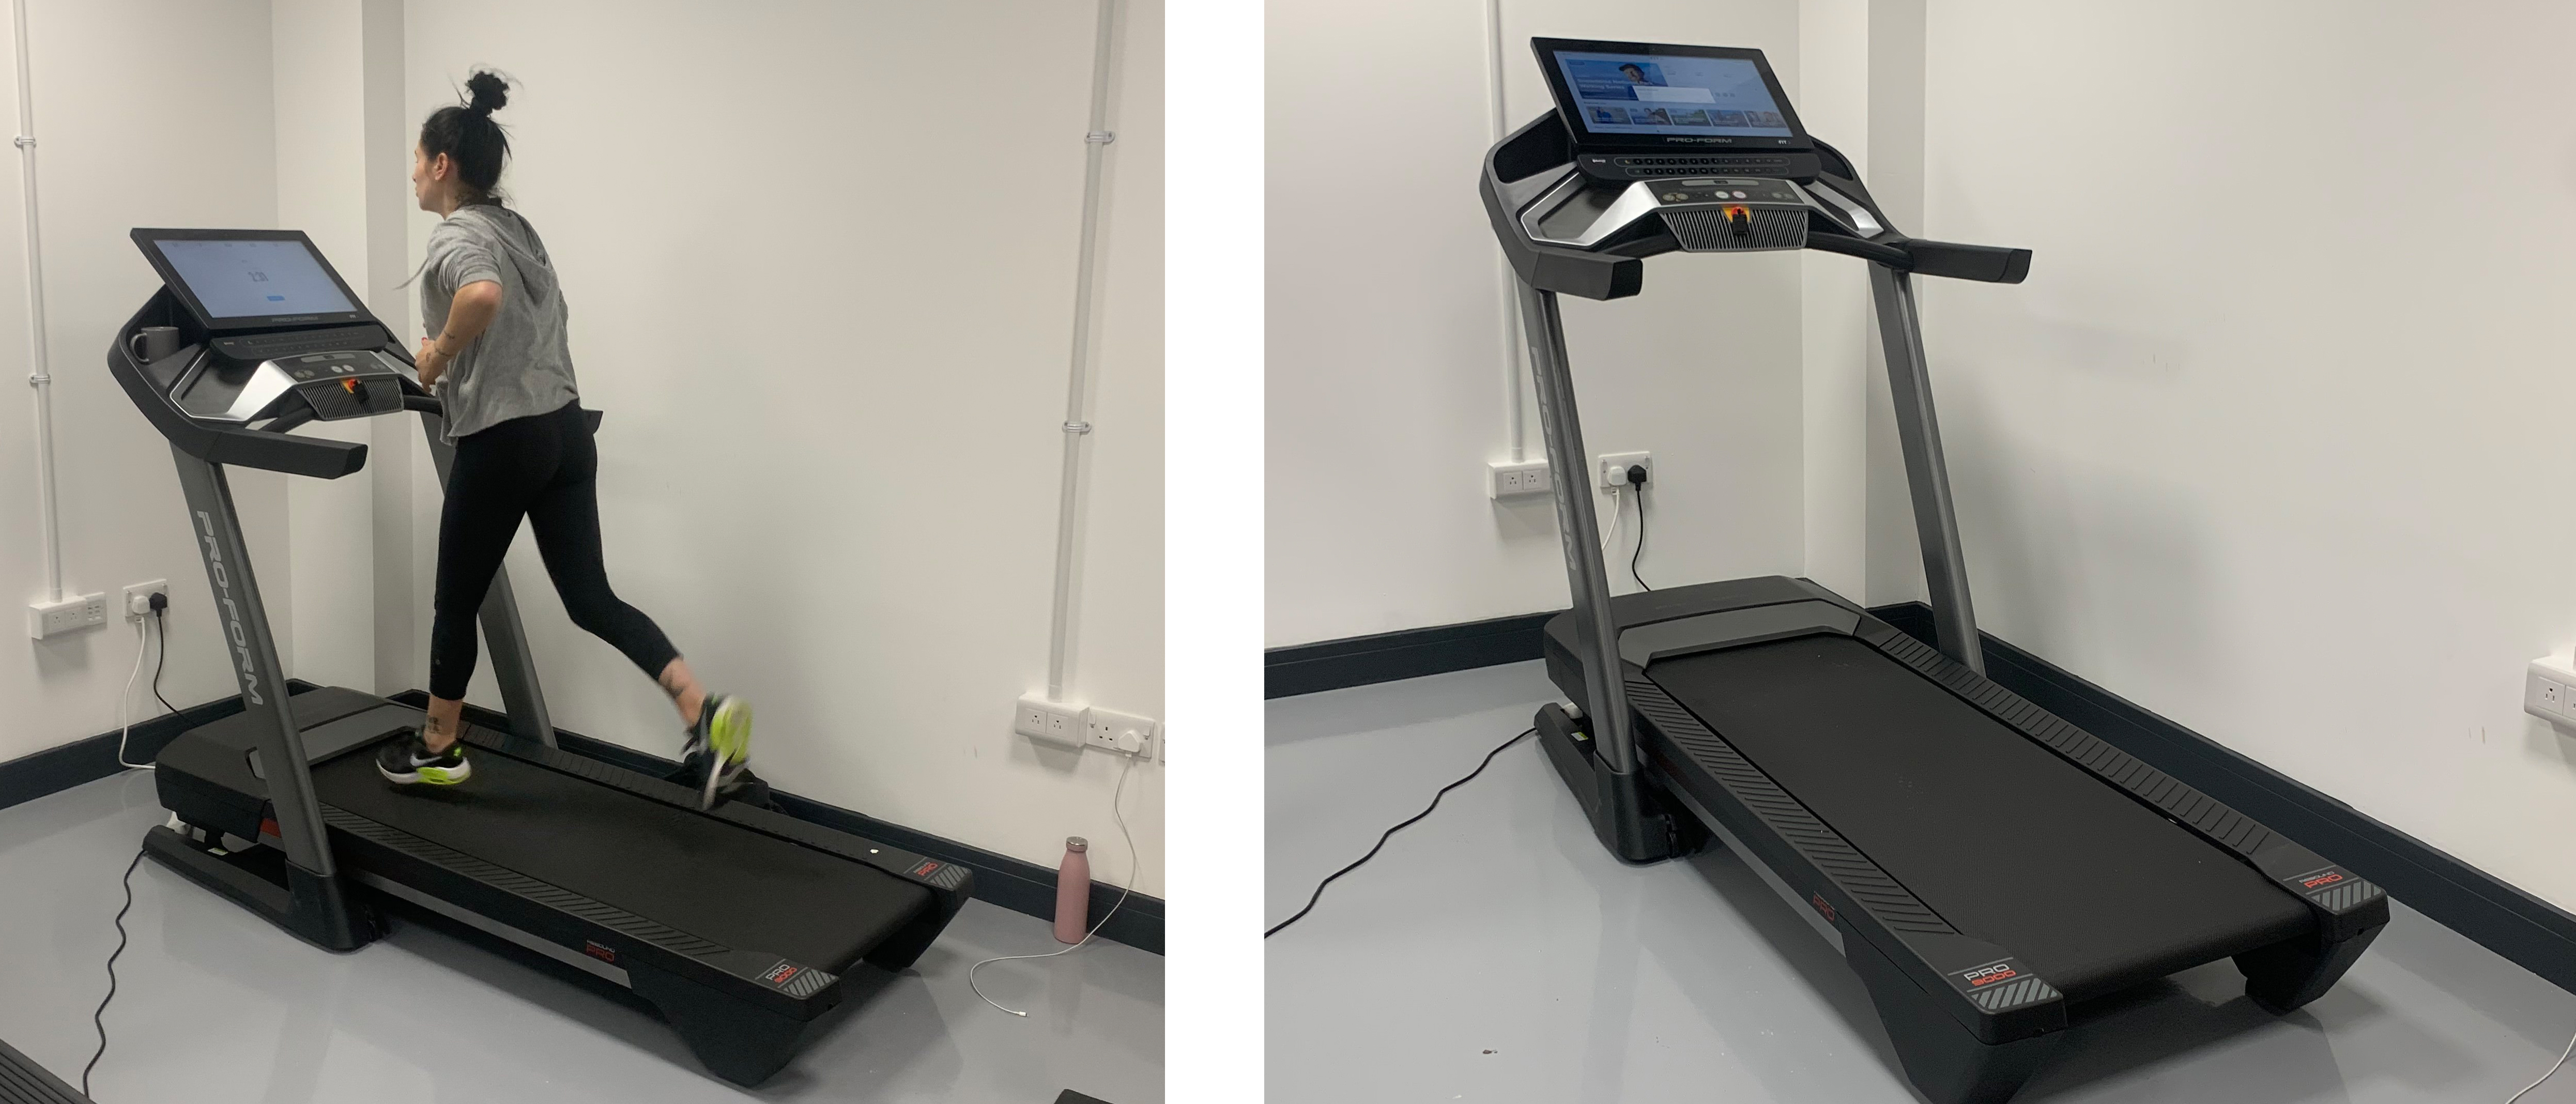 Proform Treadmill Without Wifi 